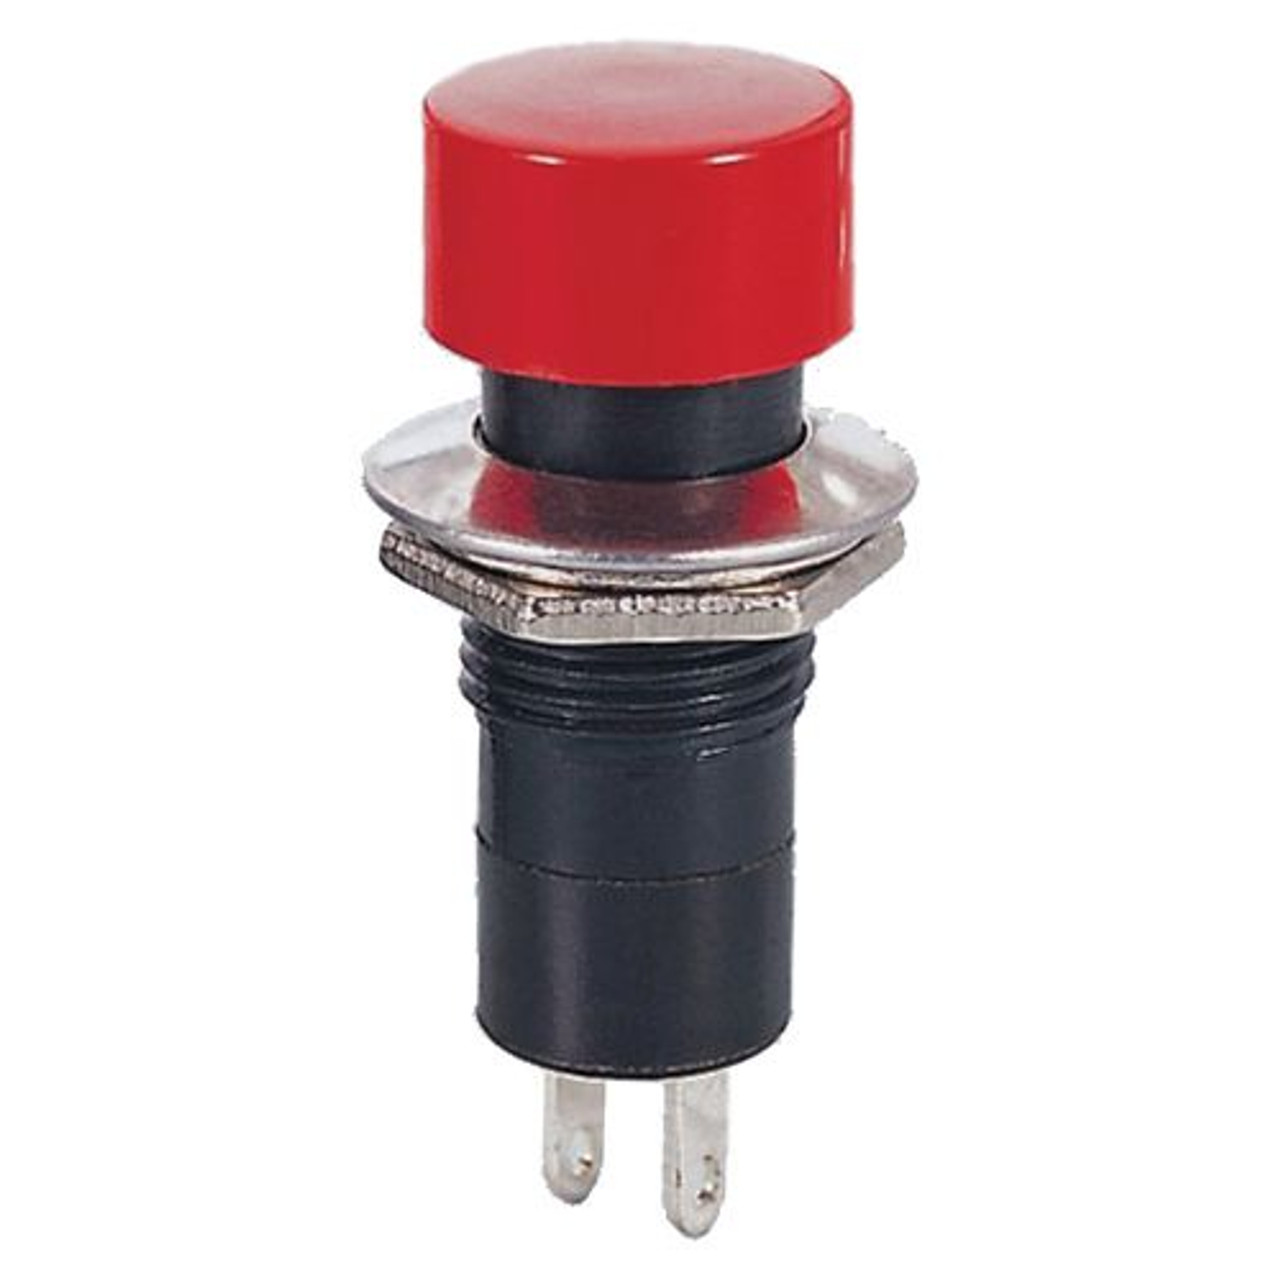 RED - Push Button Switch On/Off SPST 2P 3A 125VAC - P/N CES-66-2408